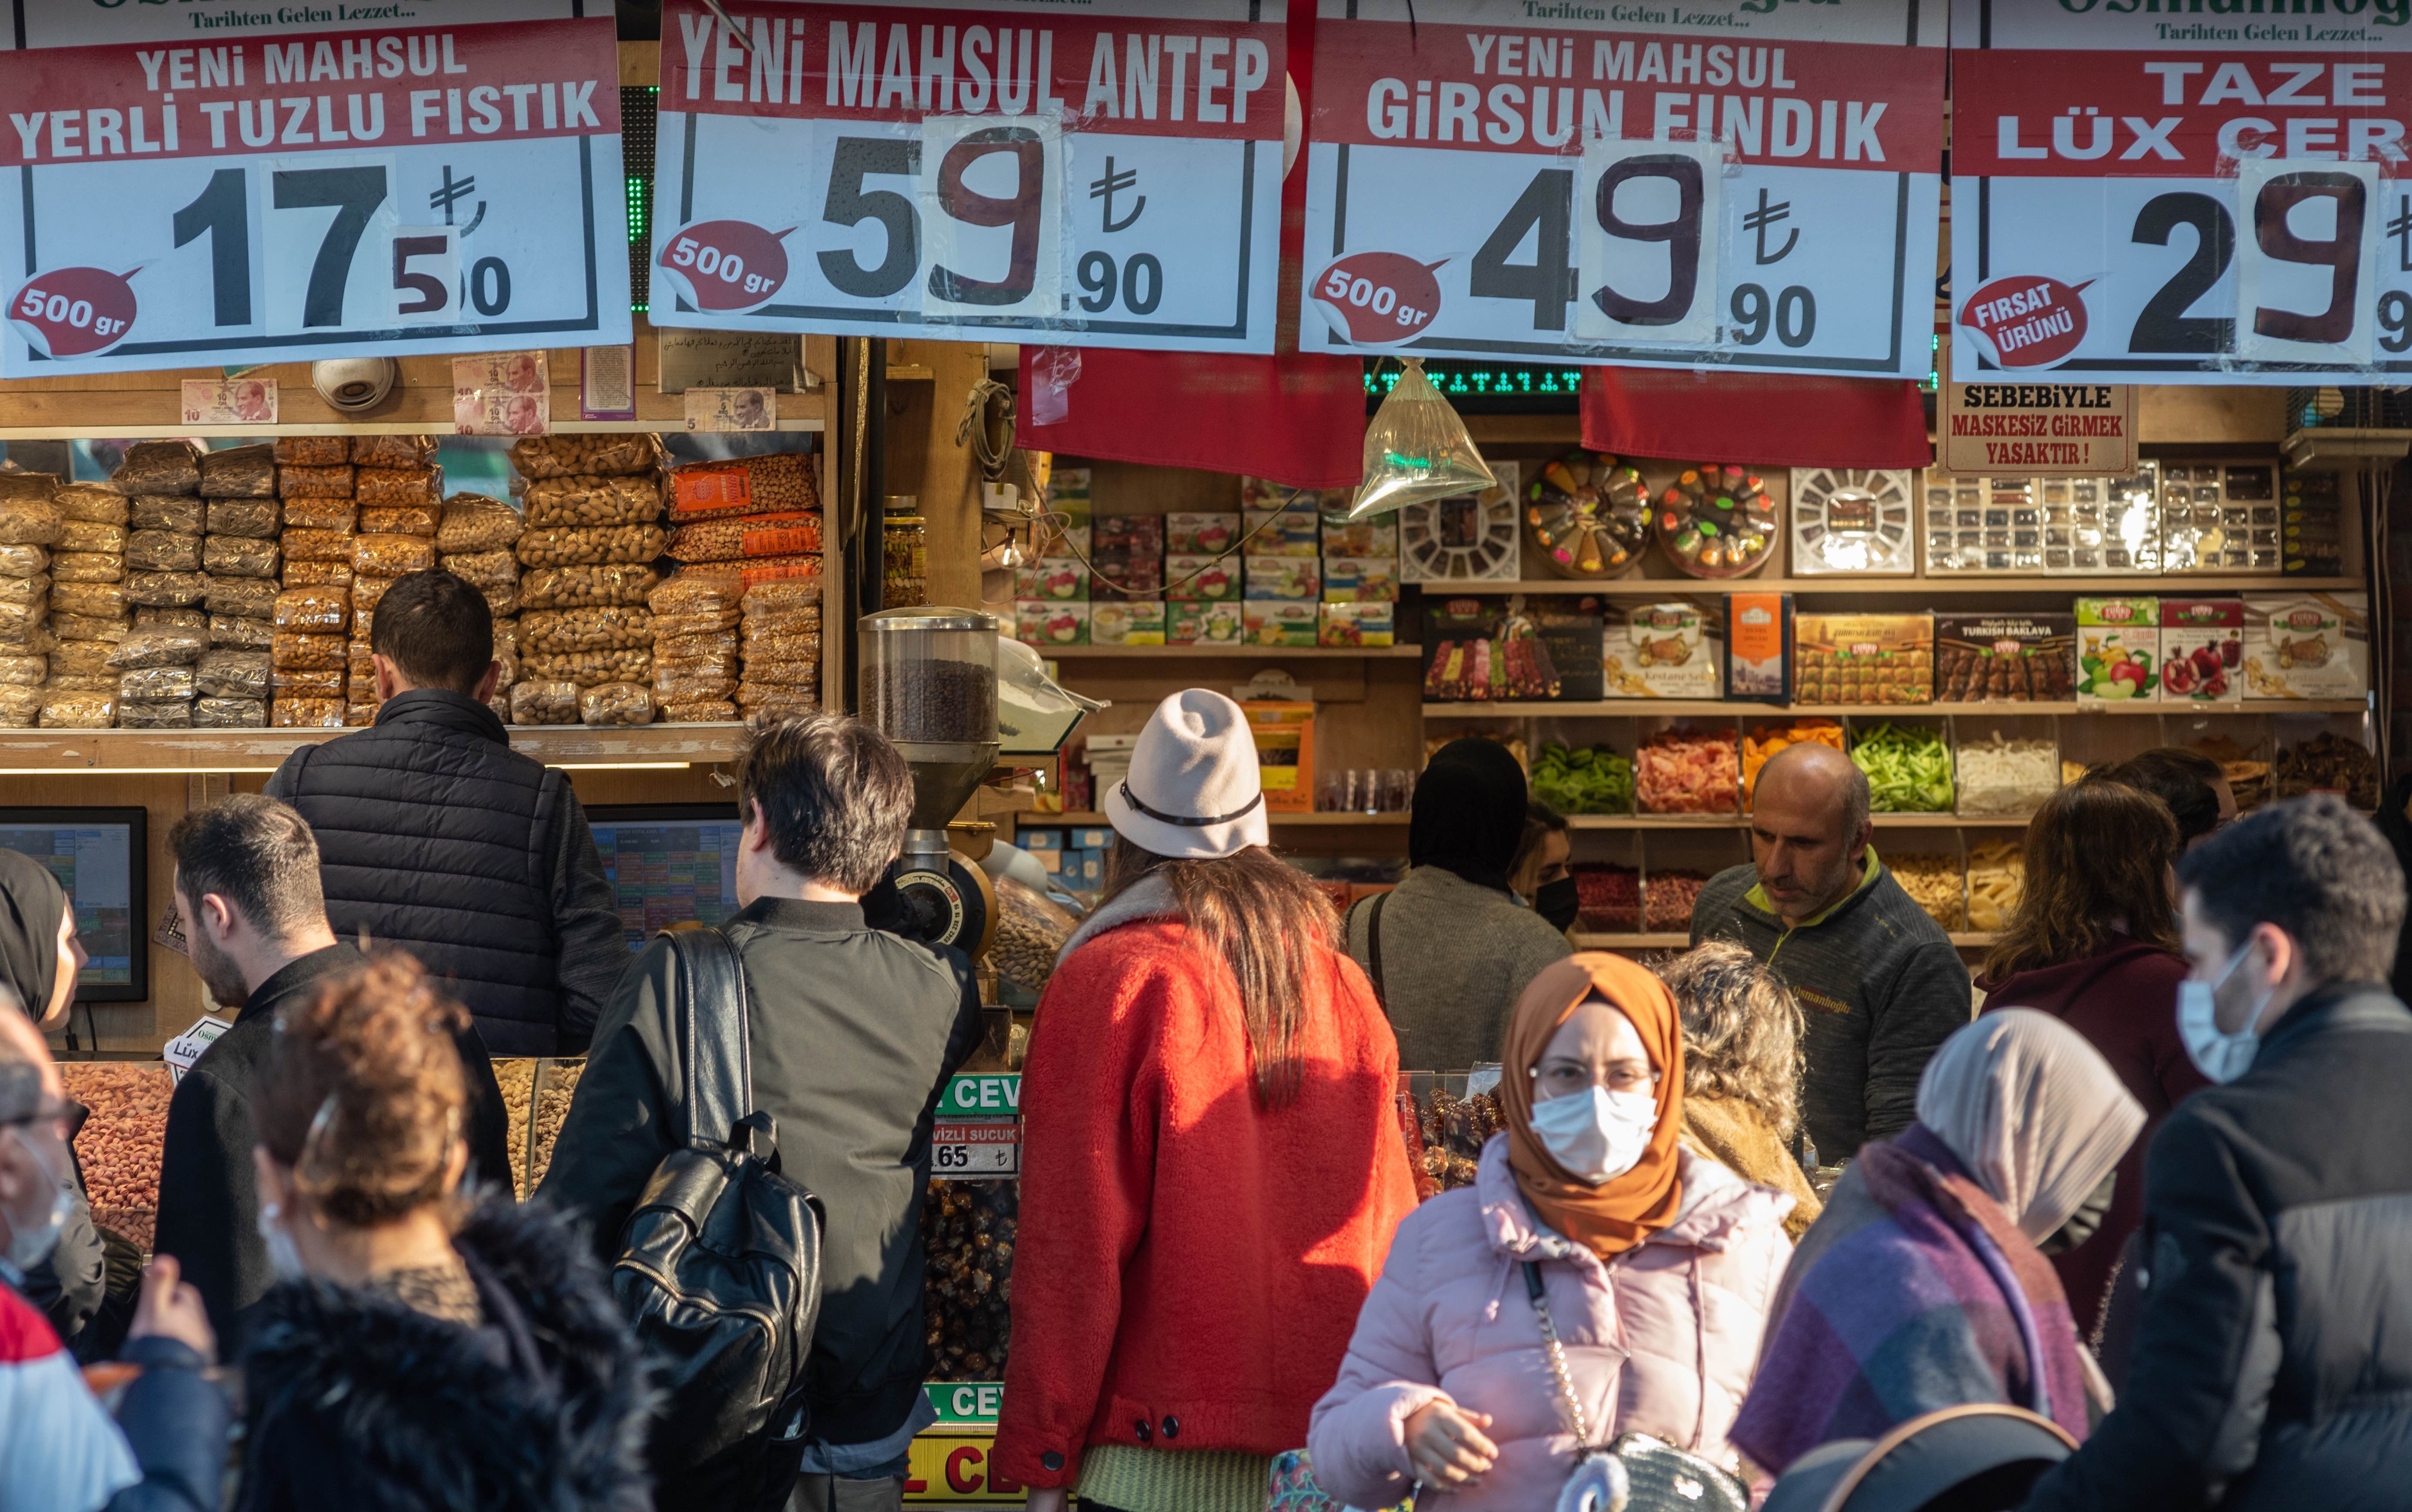 Customers at a food market in Istanbul, signs with raised prices